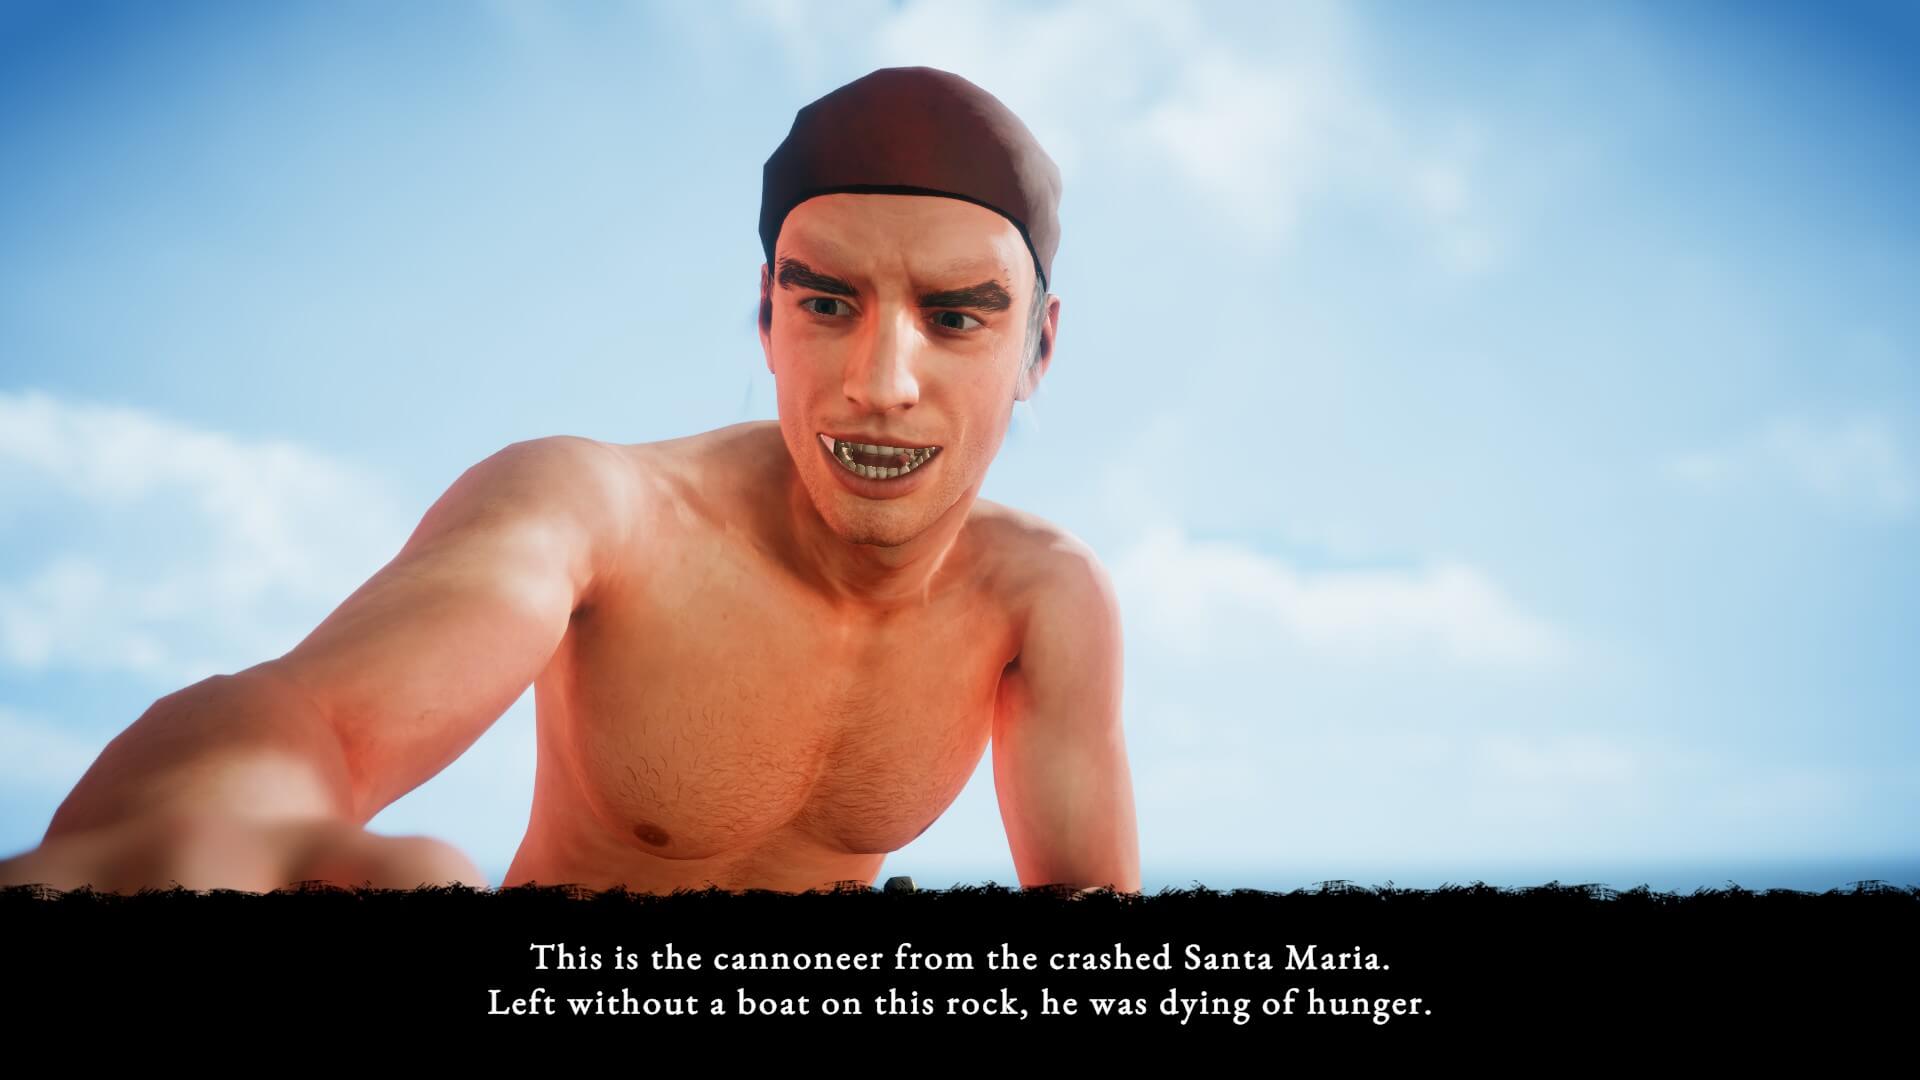 A cutscene describing who the individual is in the shot. the man seems to wearing a brown bandanna and is topless as it is a sunny day.